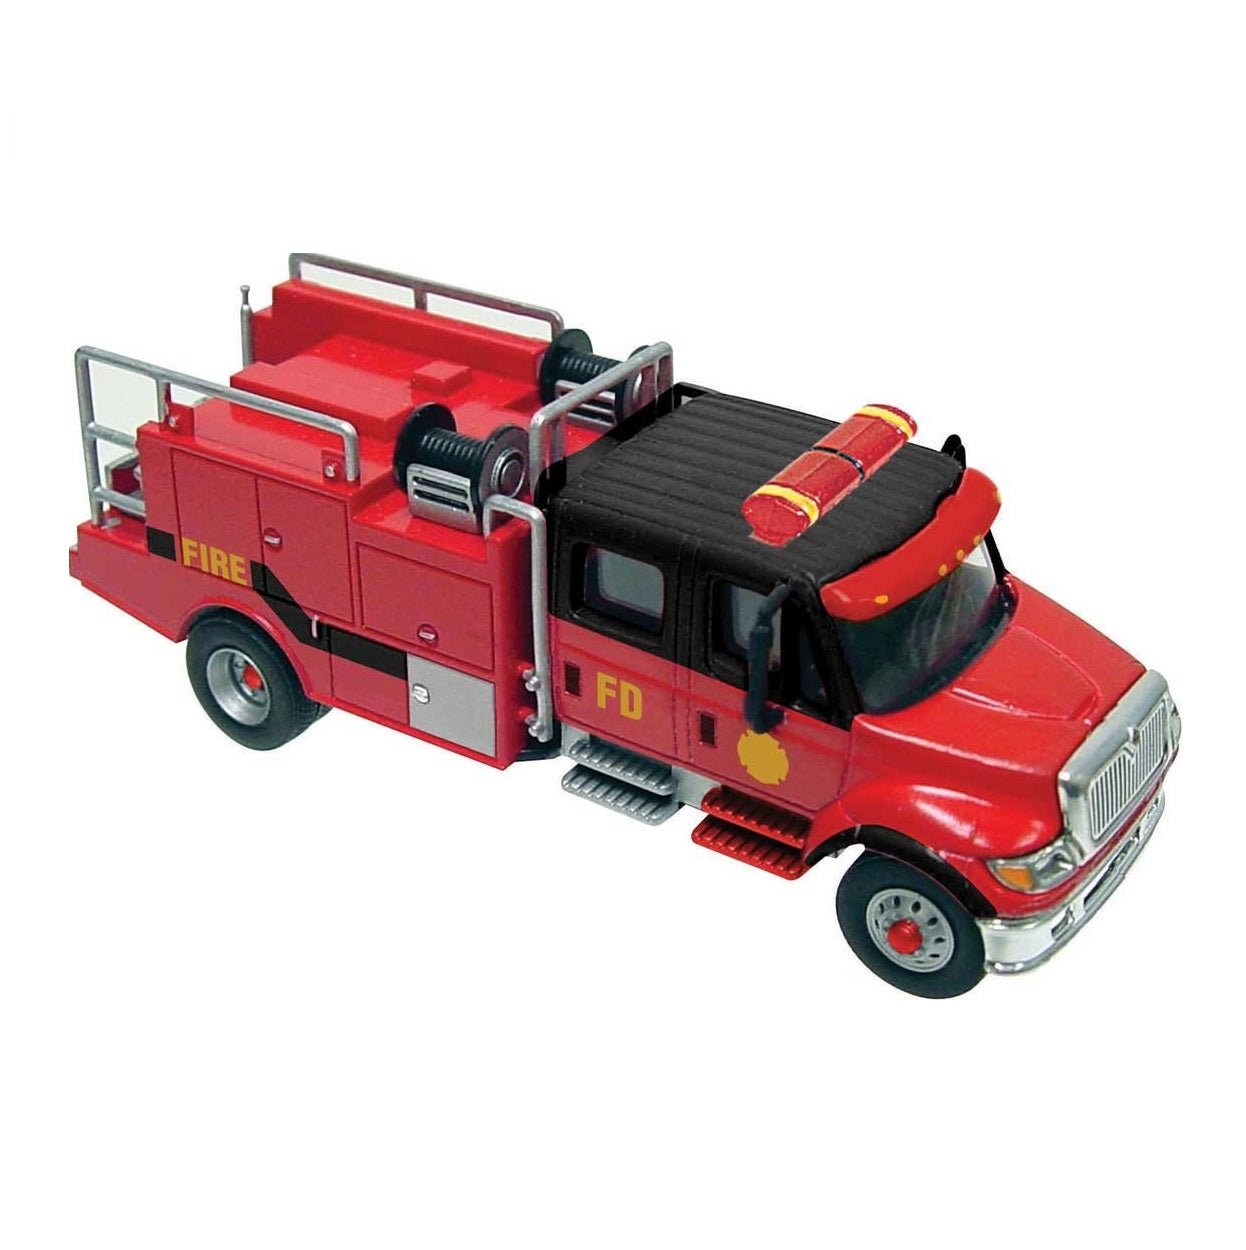 Walthers SceneMaster International 7600 2 - Axle Crew - Cab Fire Truck, HO Scale